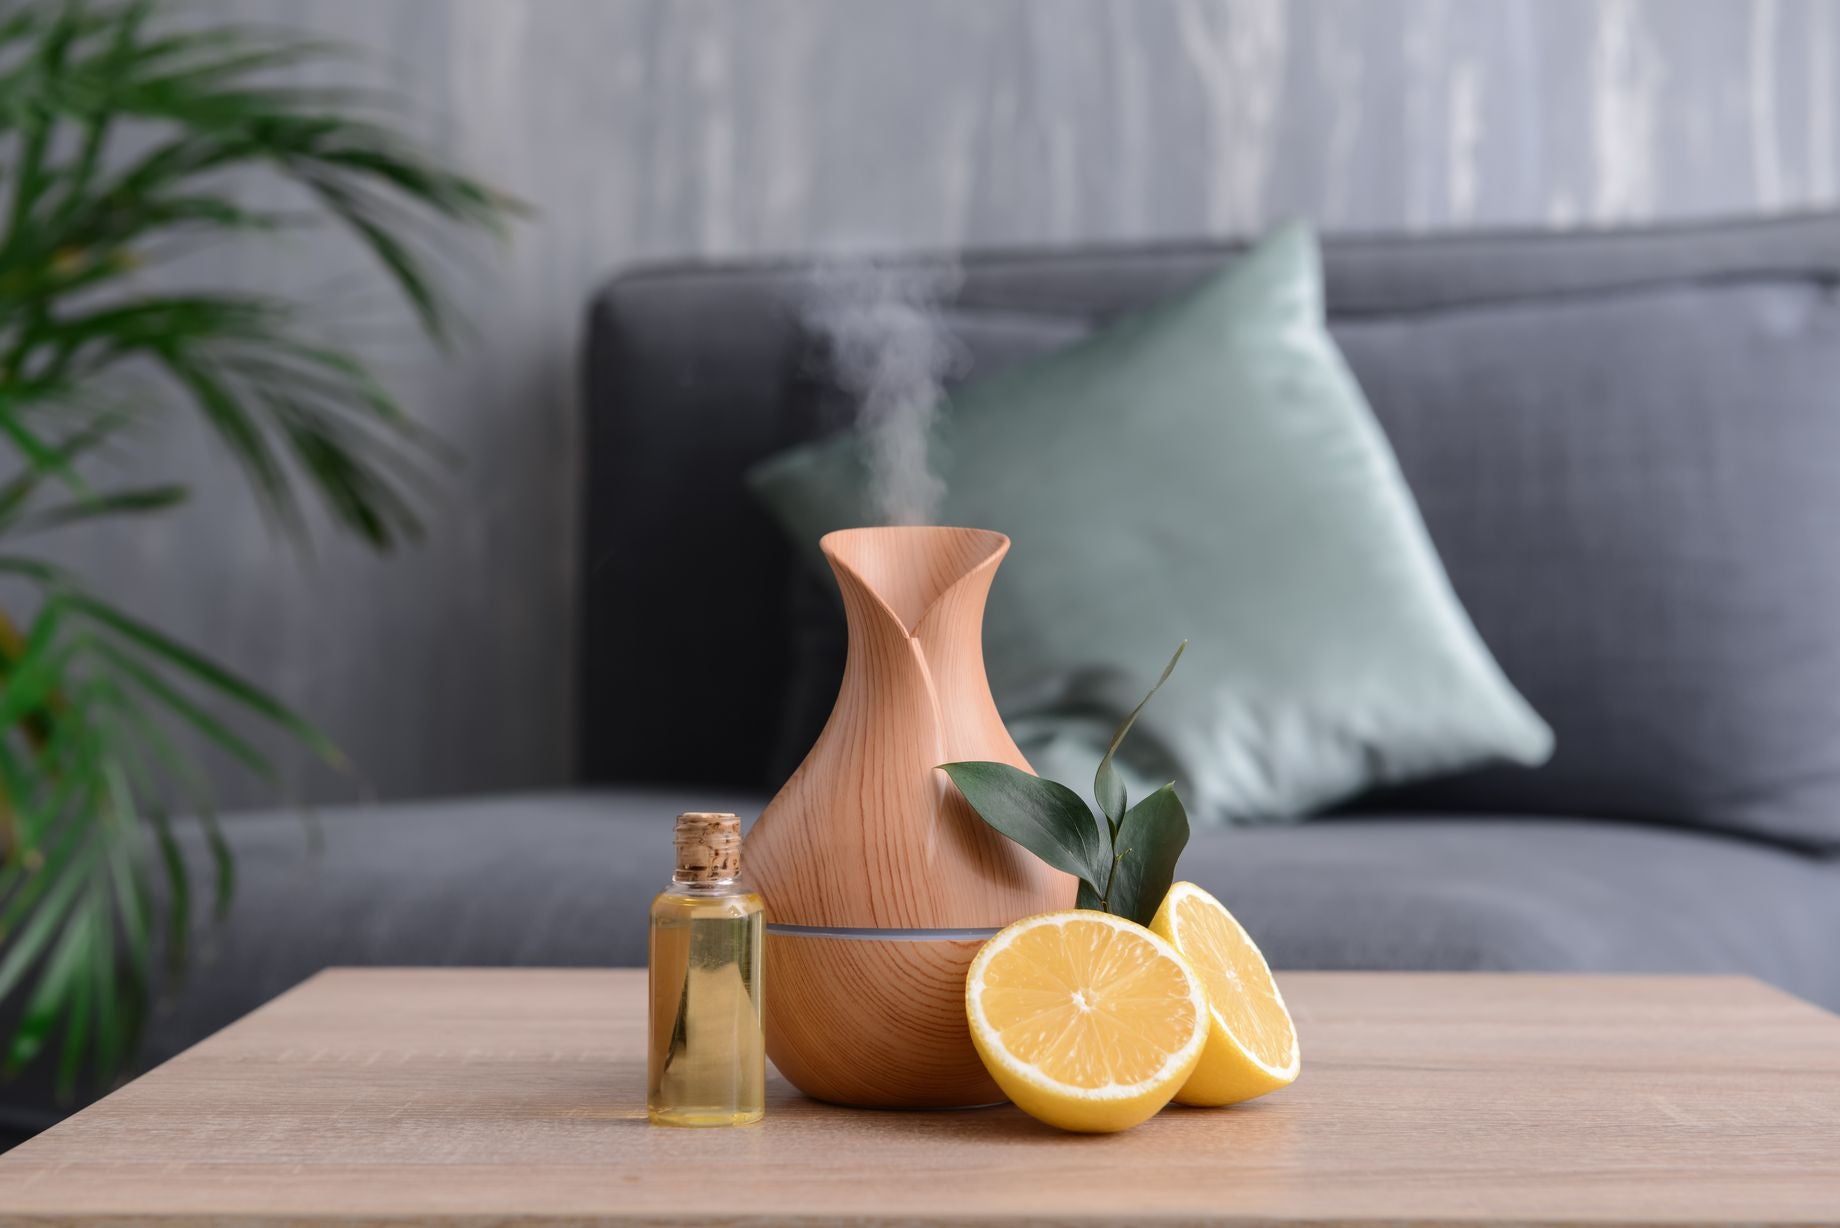 An Aromatherapy Diffuser Help Improve My Body, Mind, And Spirit